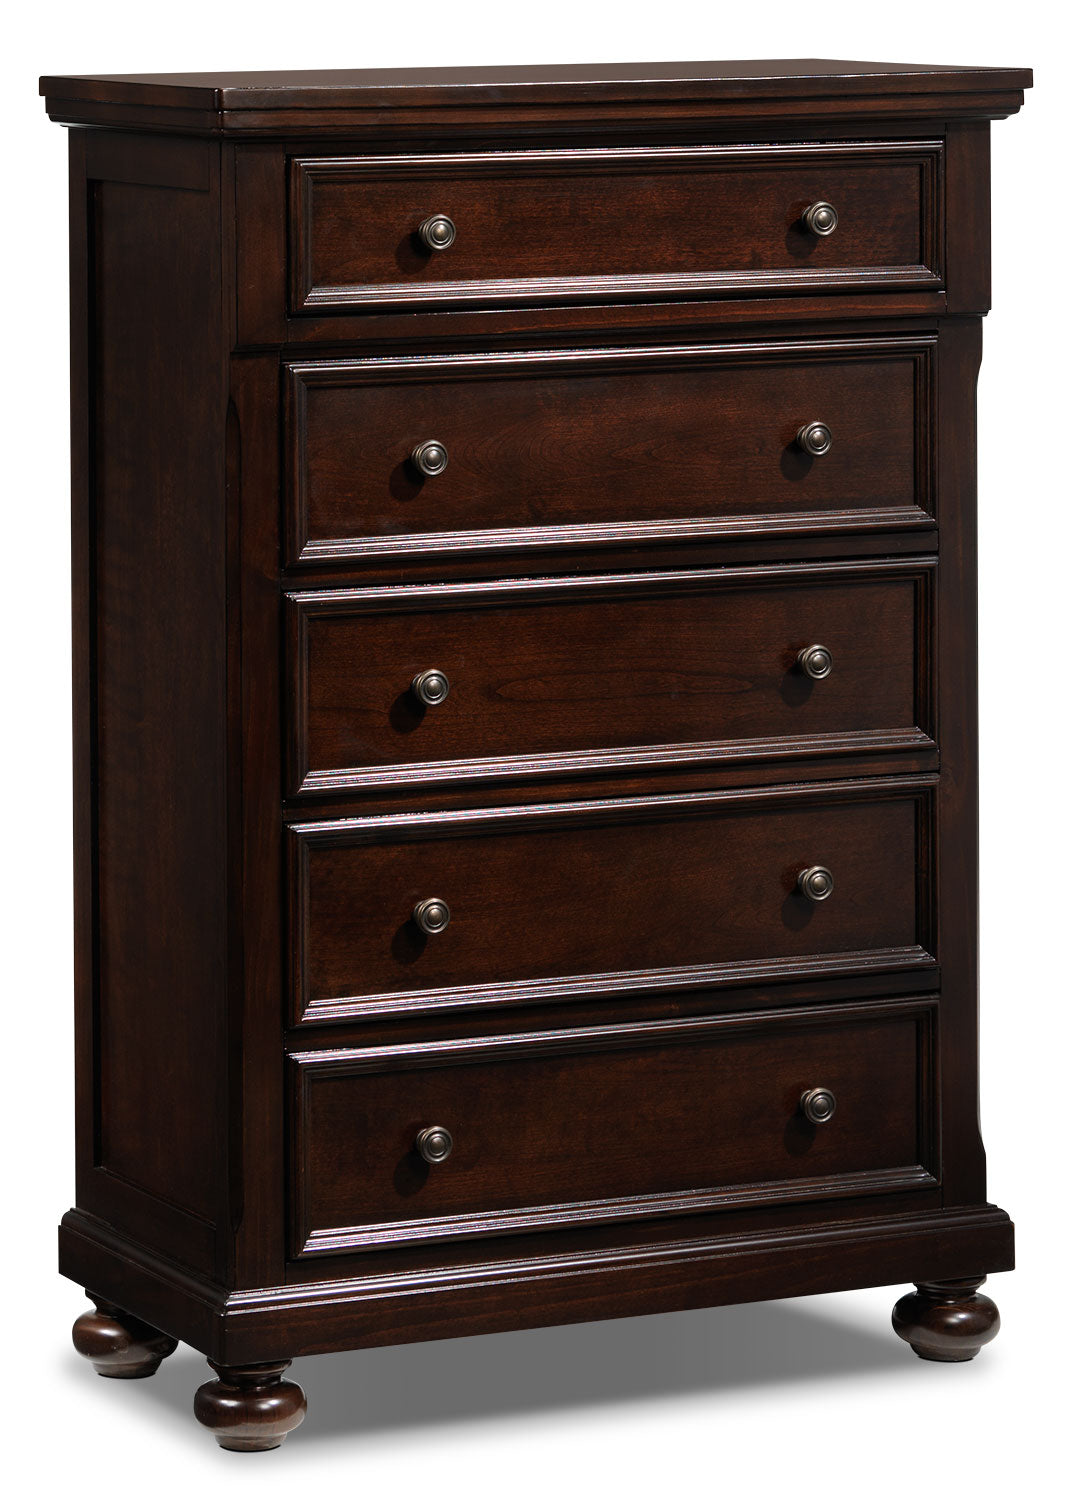 Chester 5-Piece King Storage Bedroom Package - Cherry